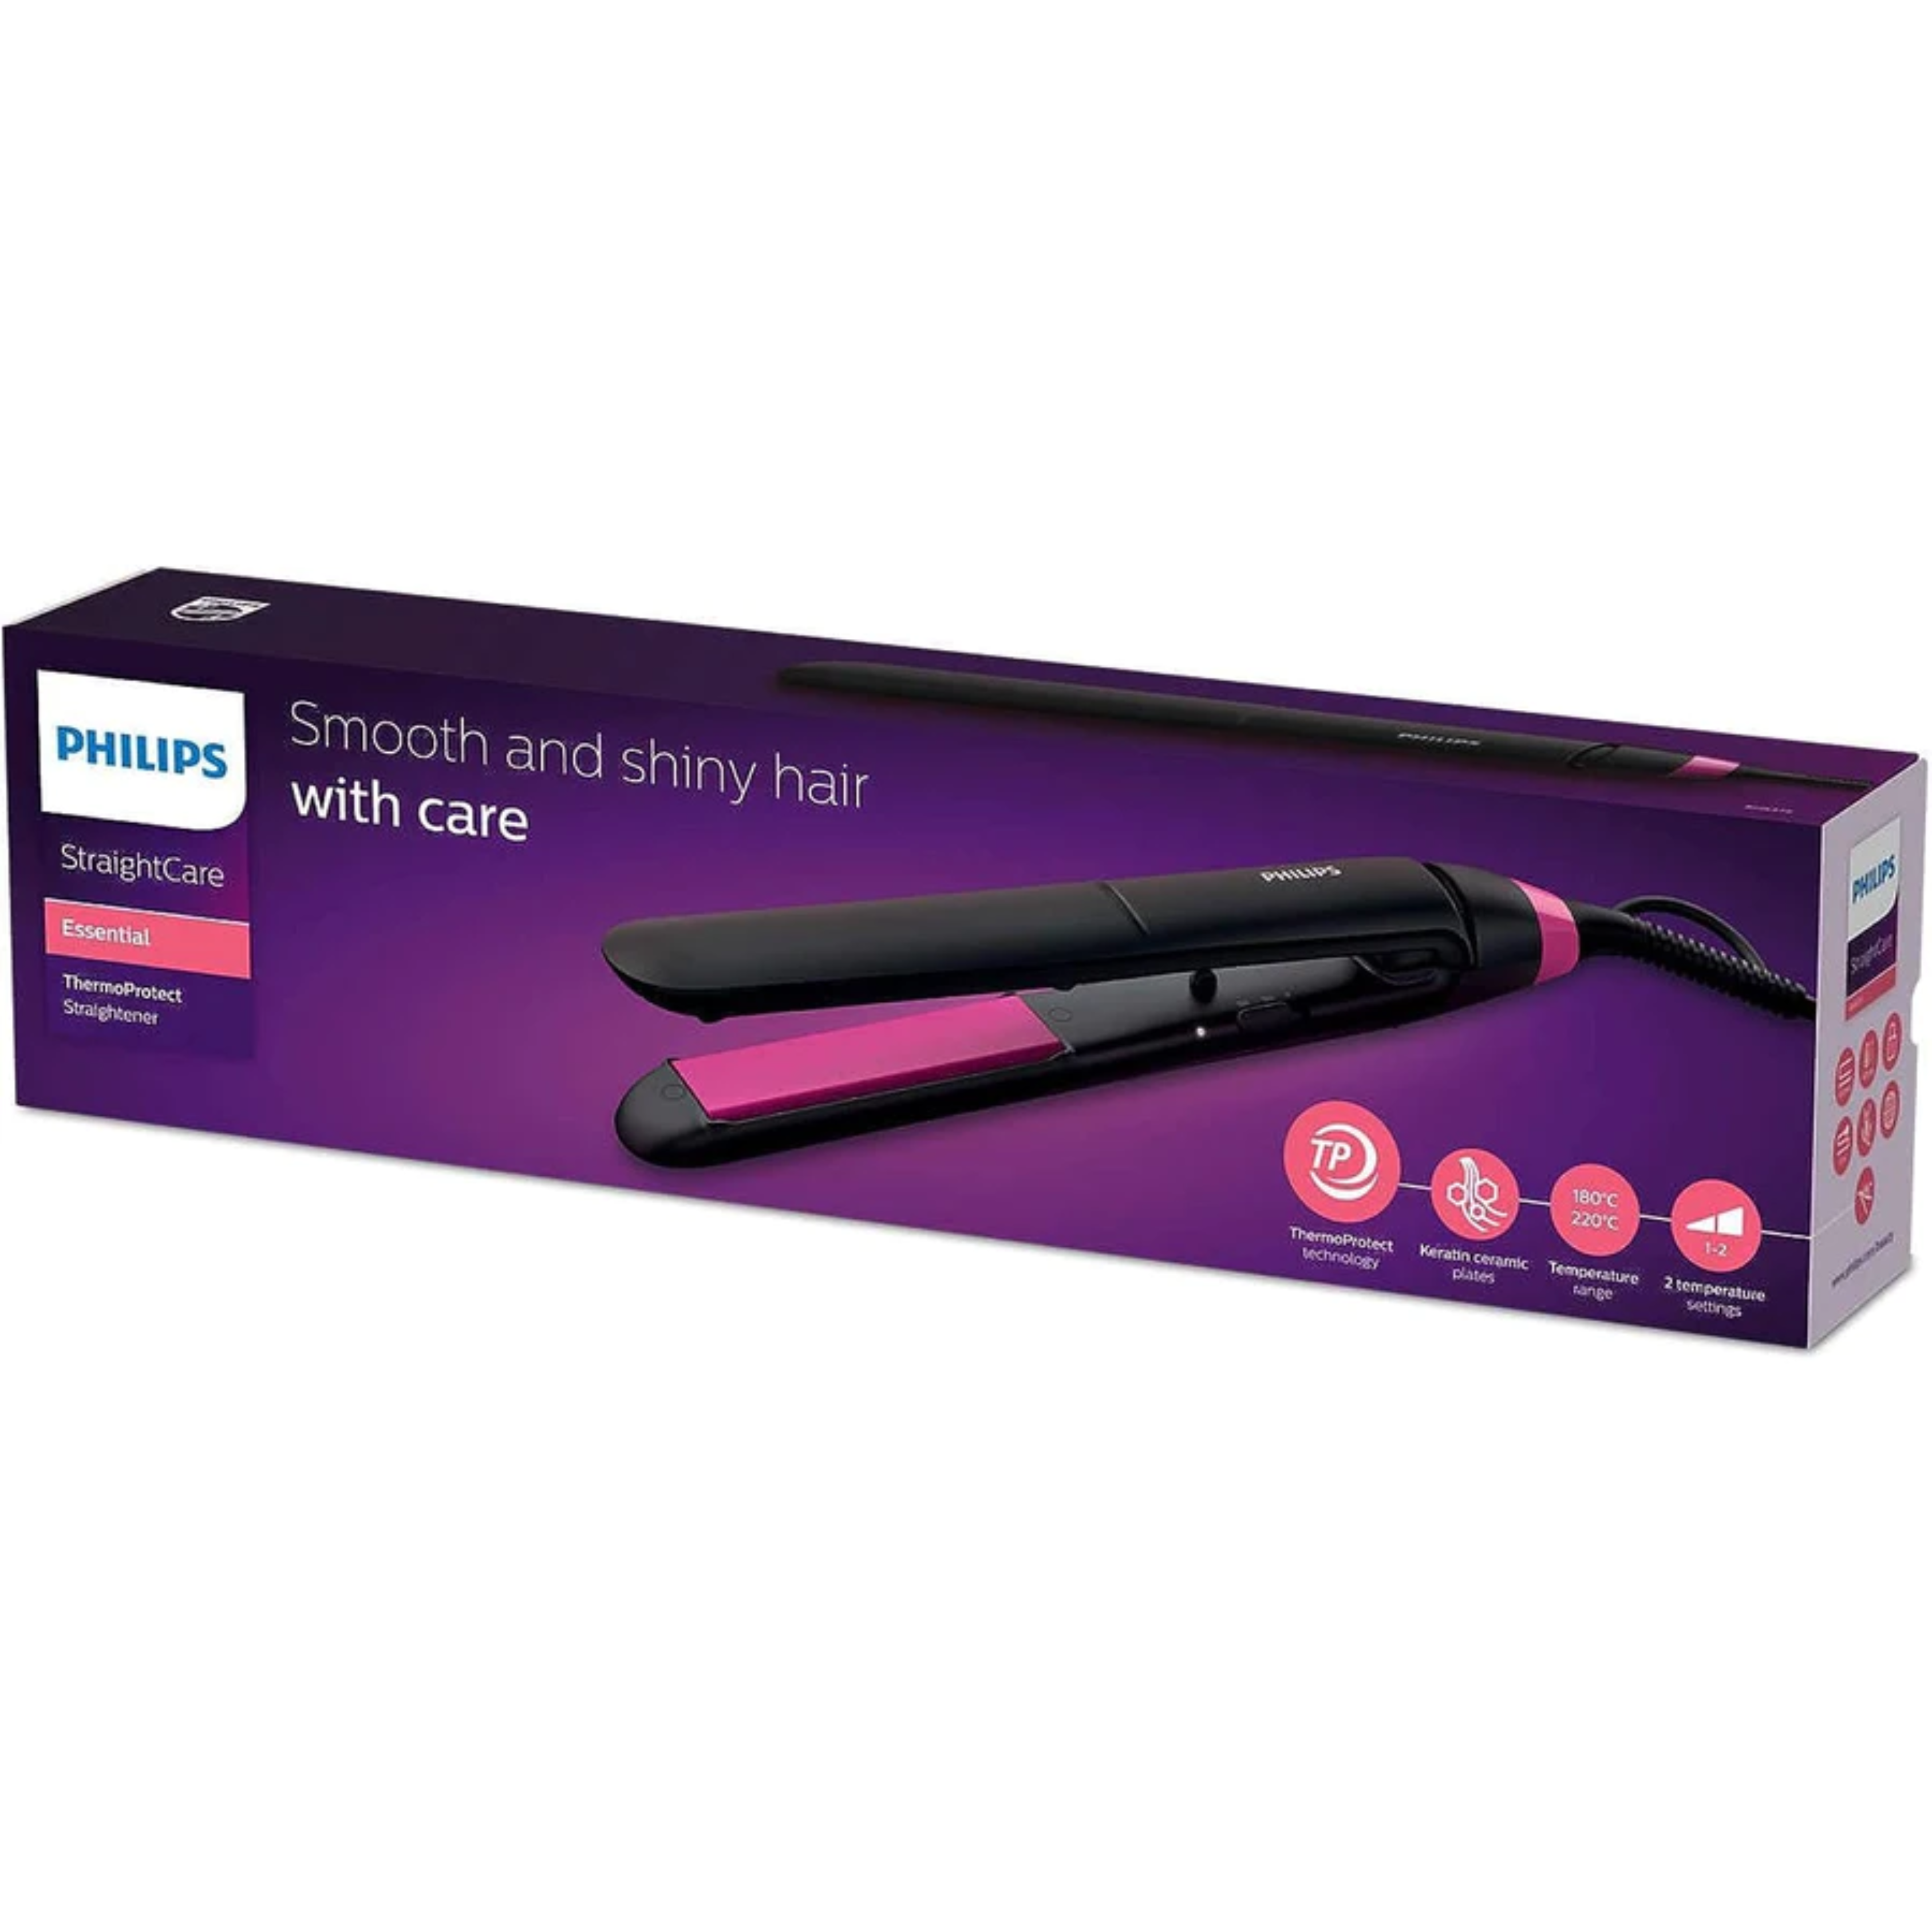 Philips Straightcare Essential Thermoprotect Straightener. 2 Temperature Settings. Temperature Range Up To 220°C. 3 Pin, Warm Black.Pink , Bhs375/03